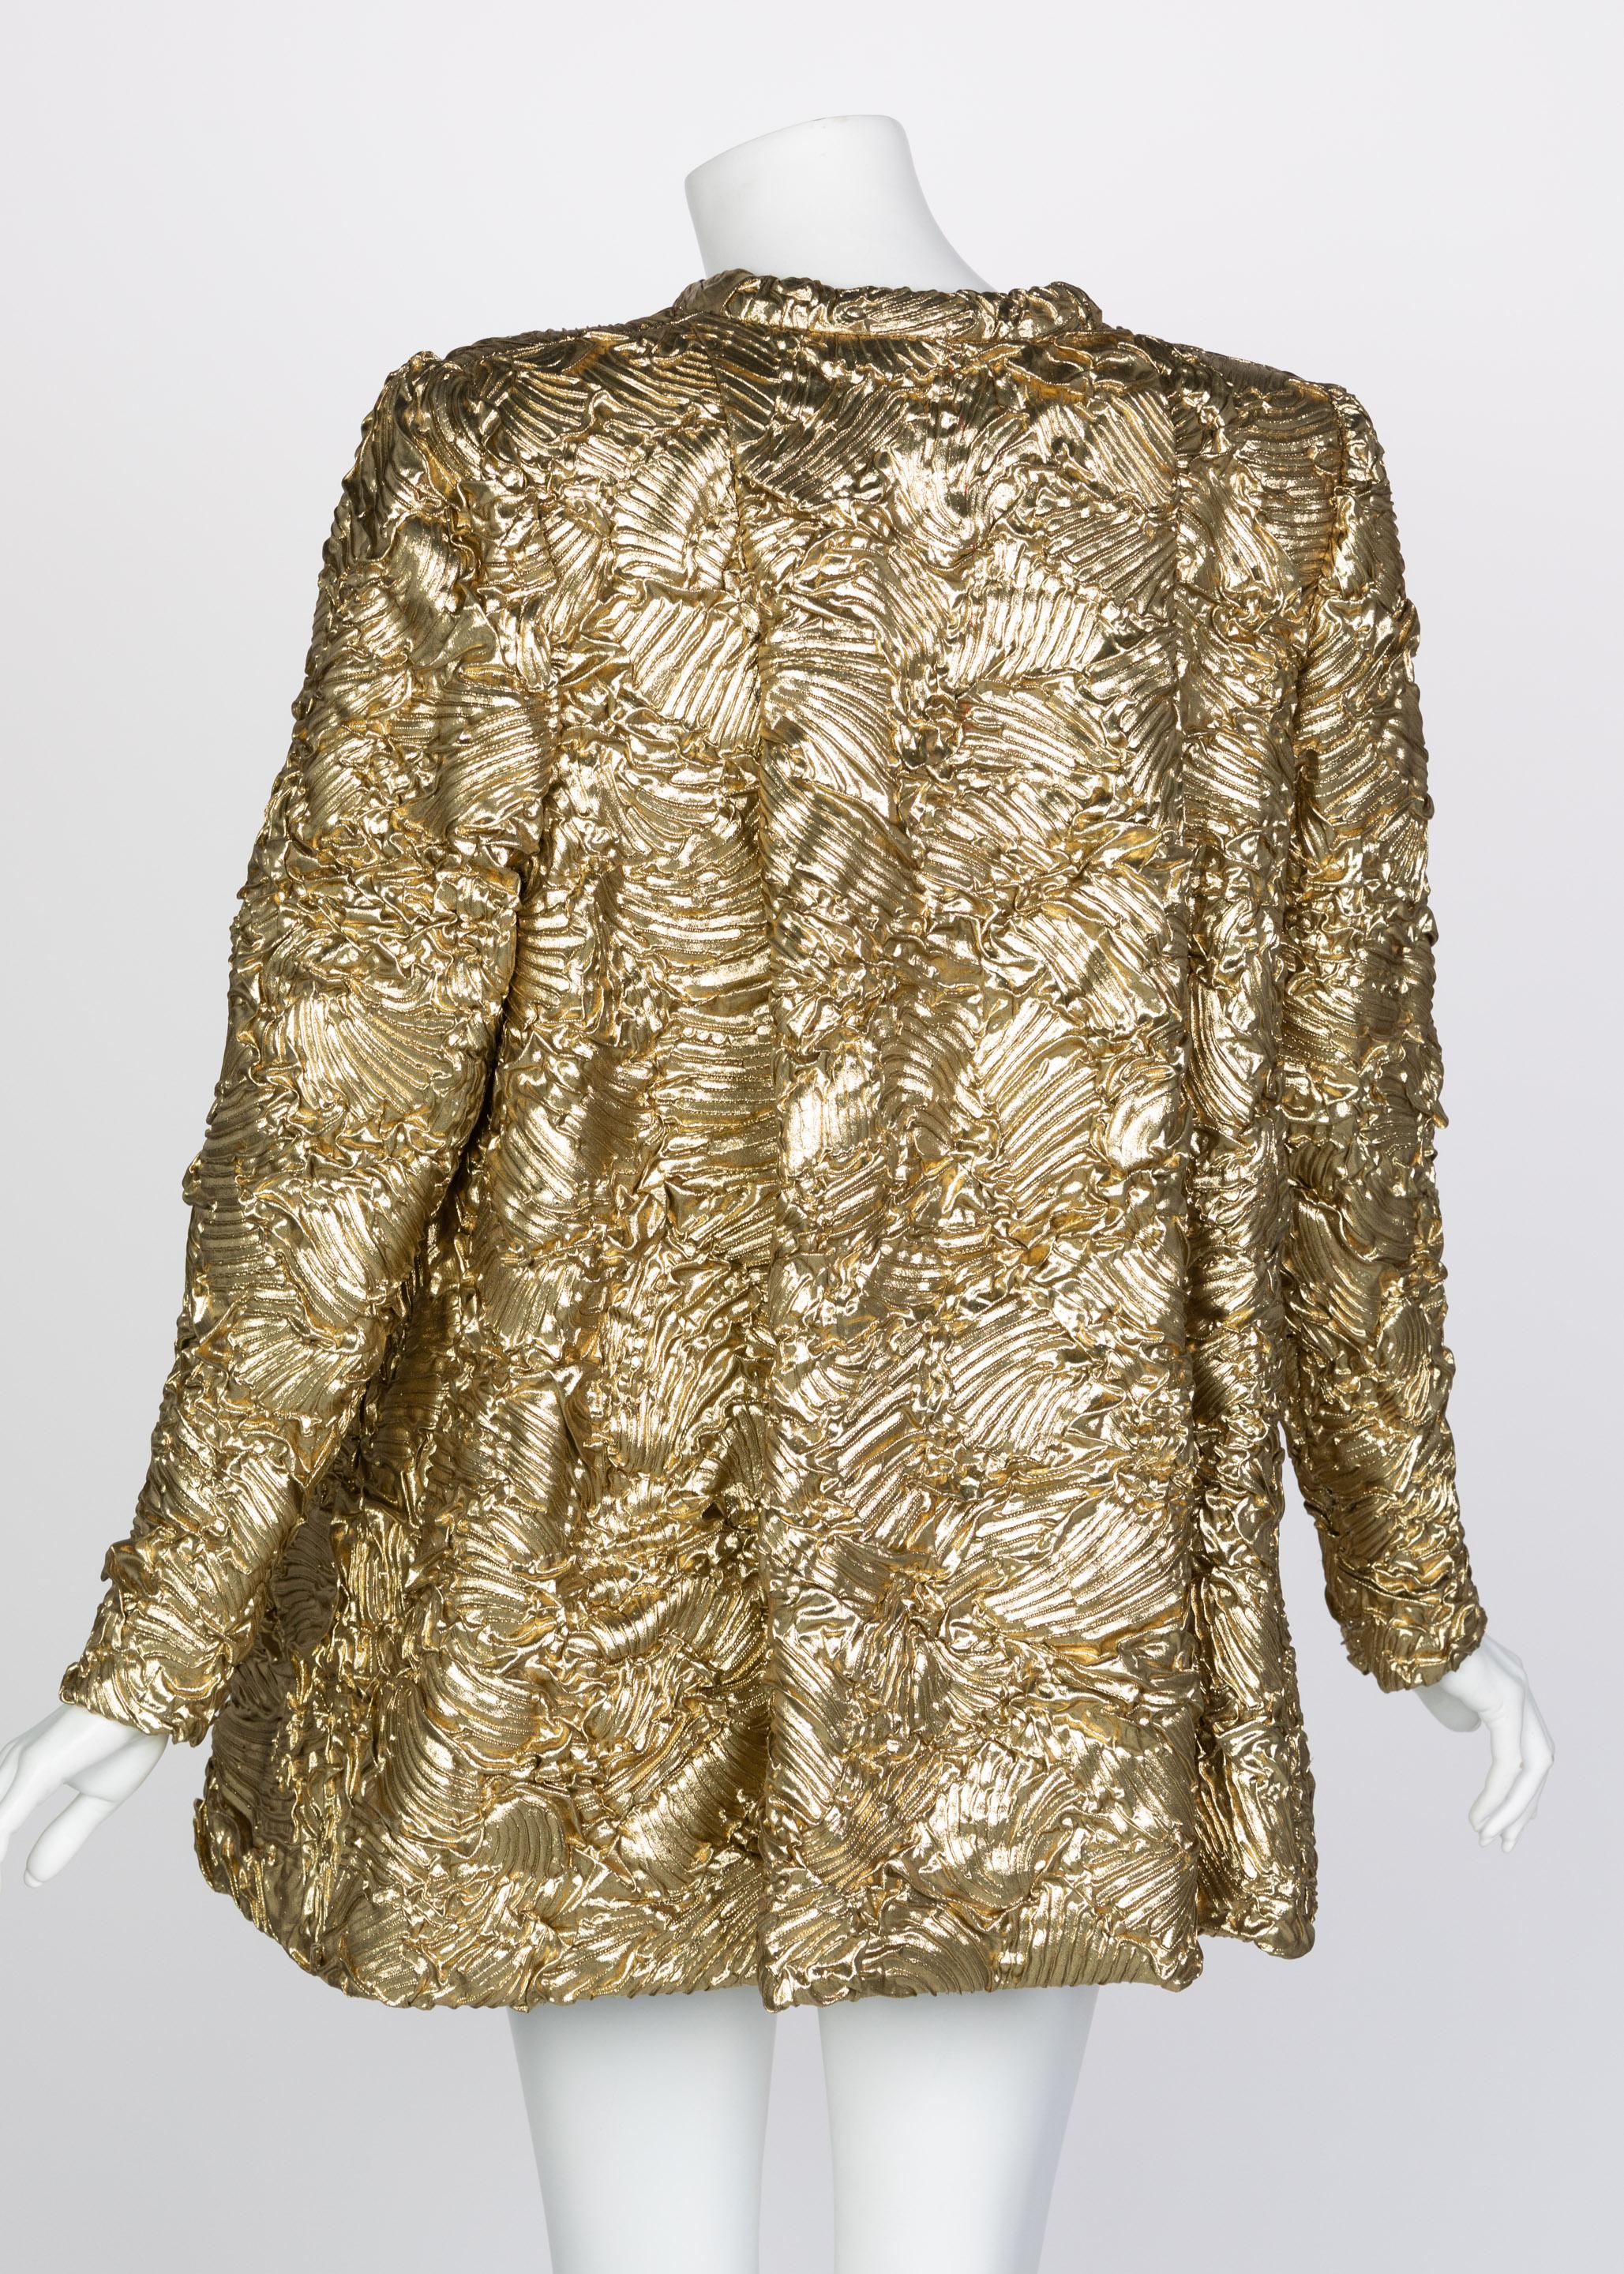 Pauline Trigère Gold Jewel Buttons Evening Jacket In Excellent Condition In Boca Raton, FL